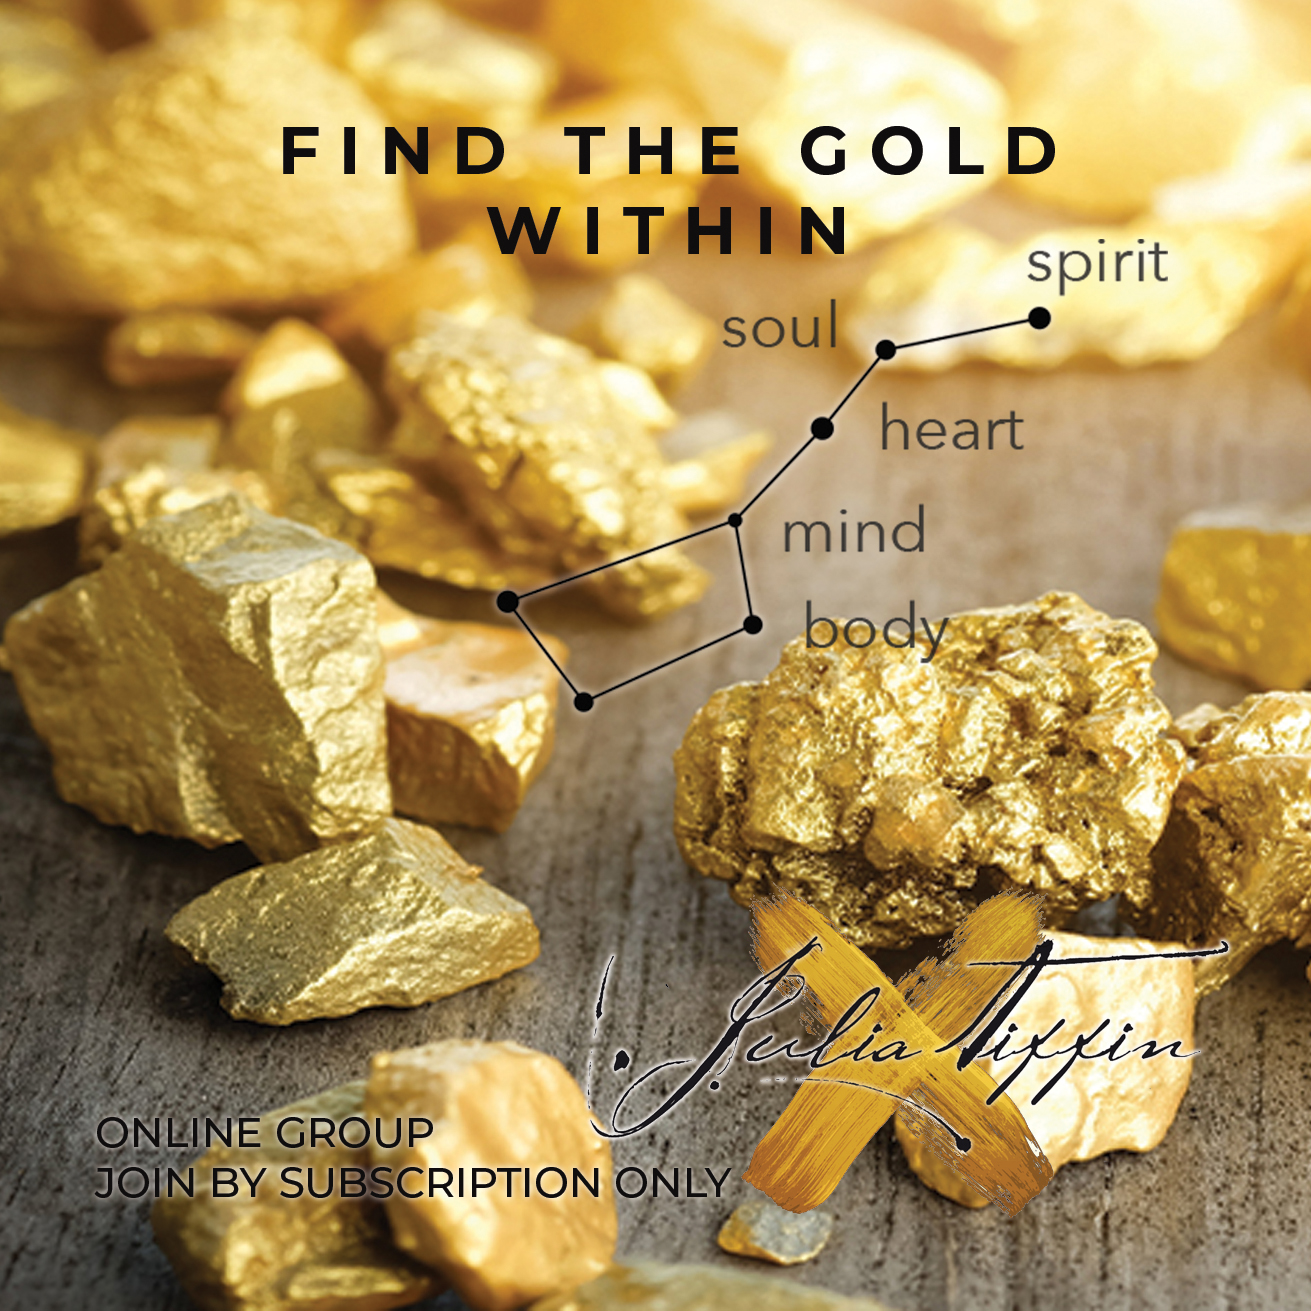 Find the Gold Within Group @ Zoom online.